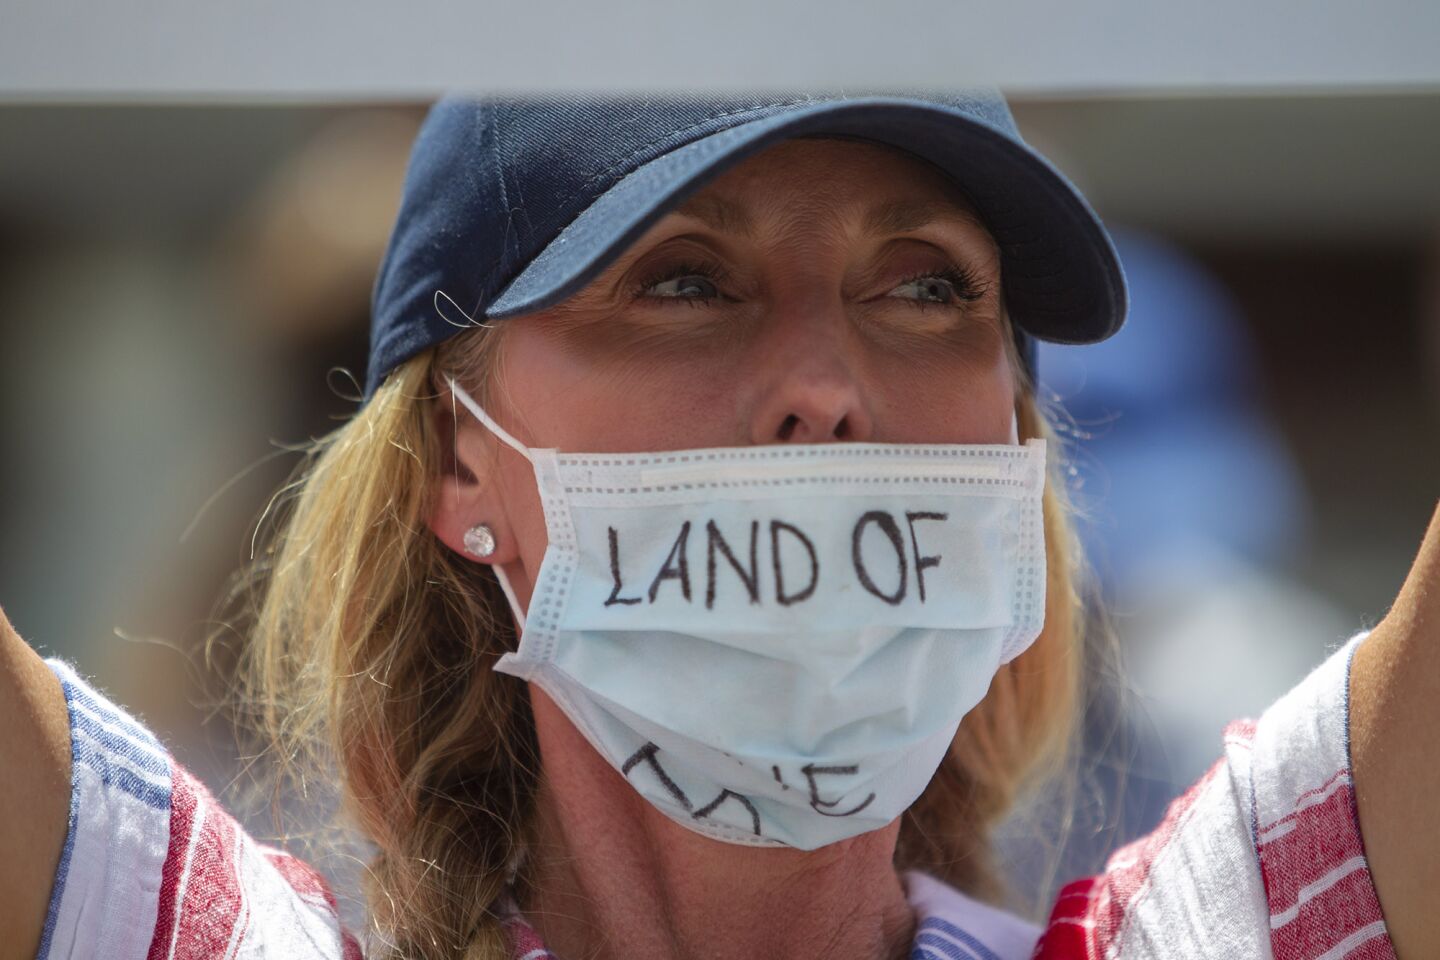 A protester who refused to give her name has a message on a mask during a protest in Huntington Beach.